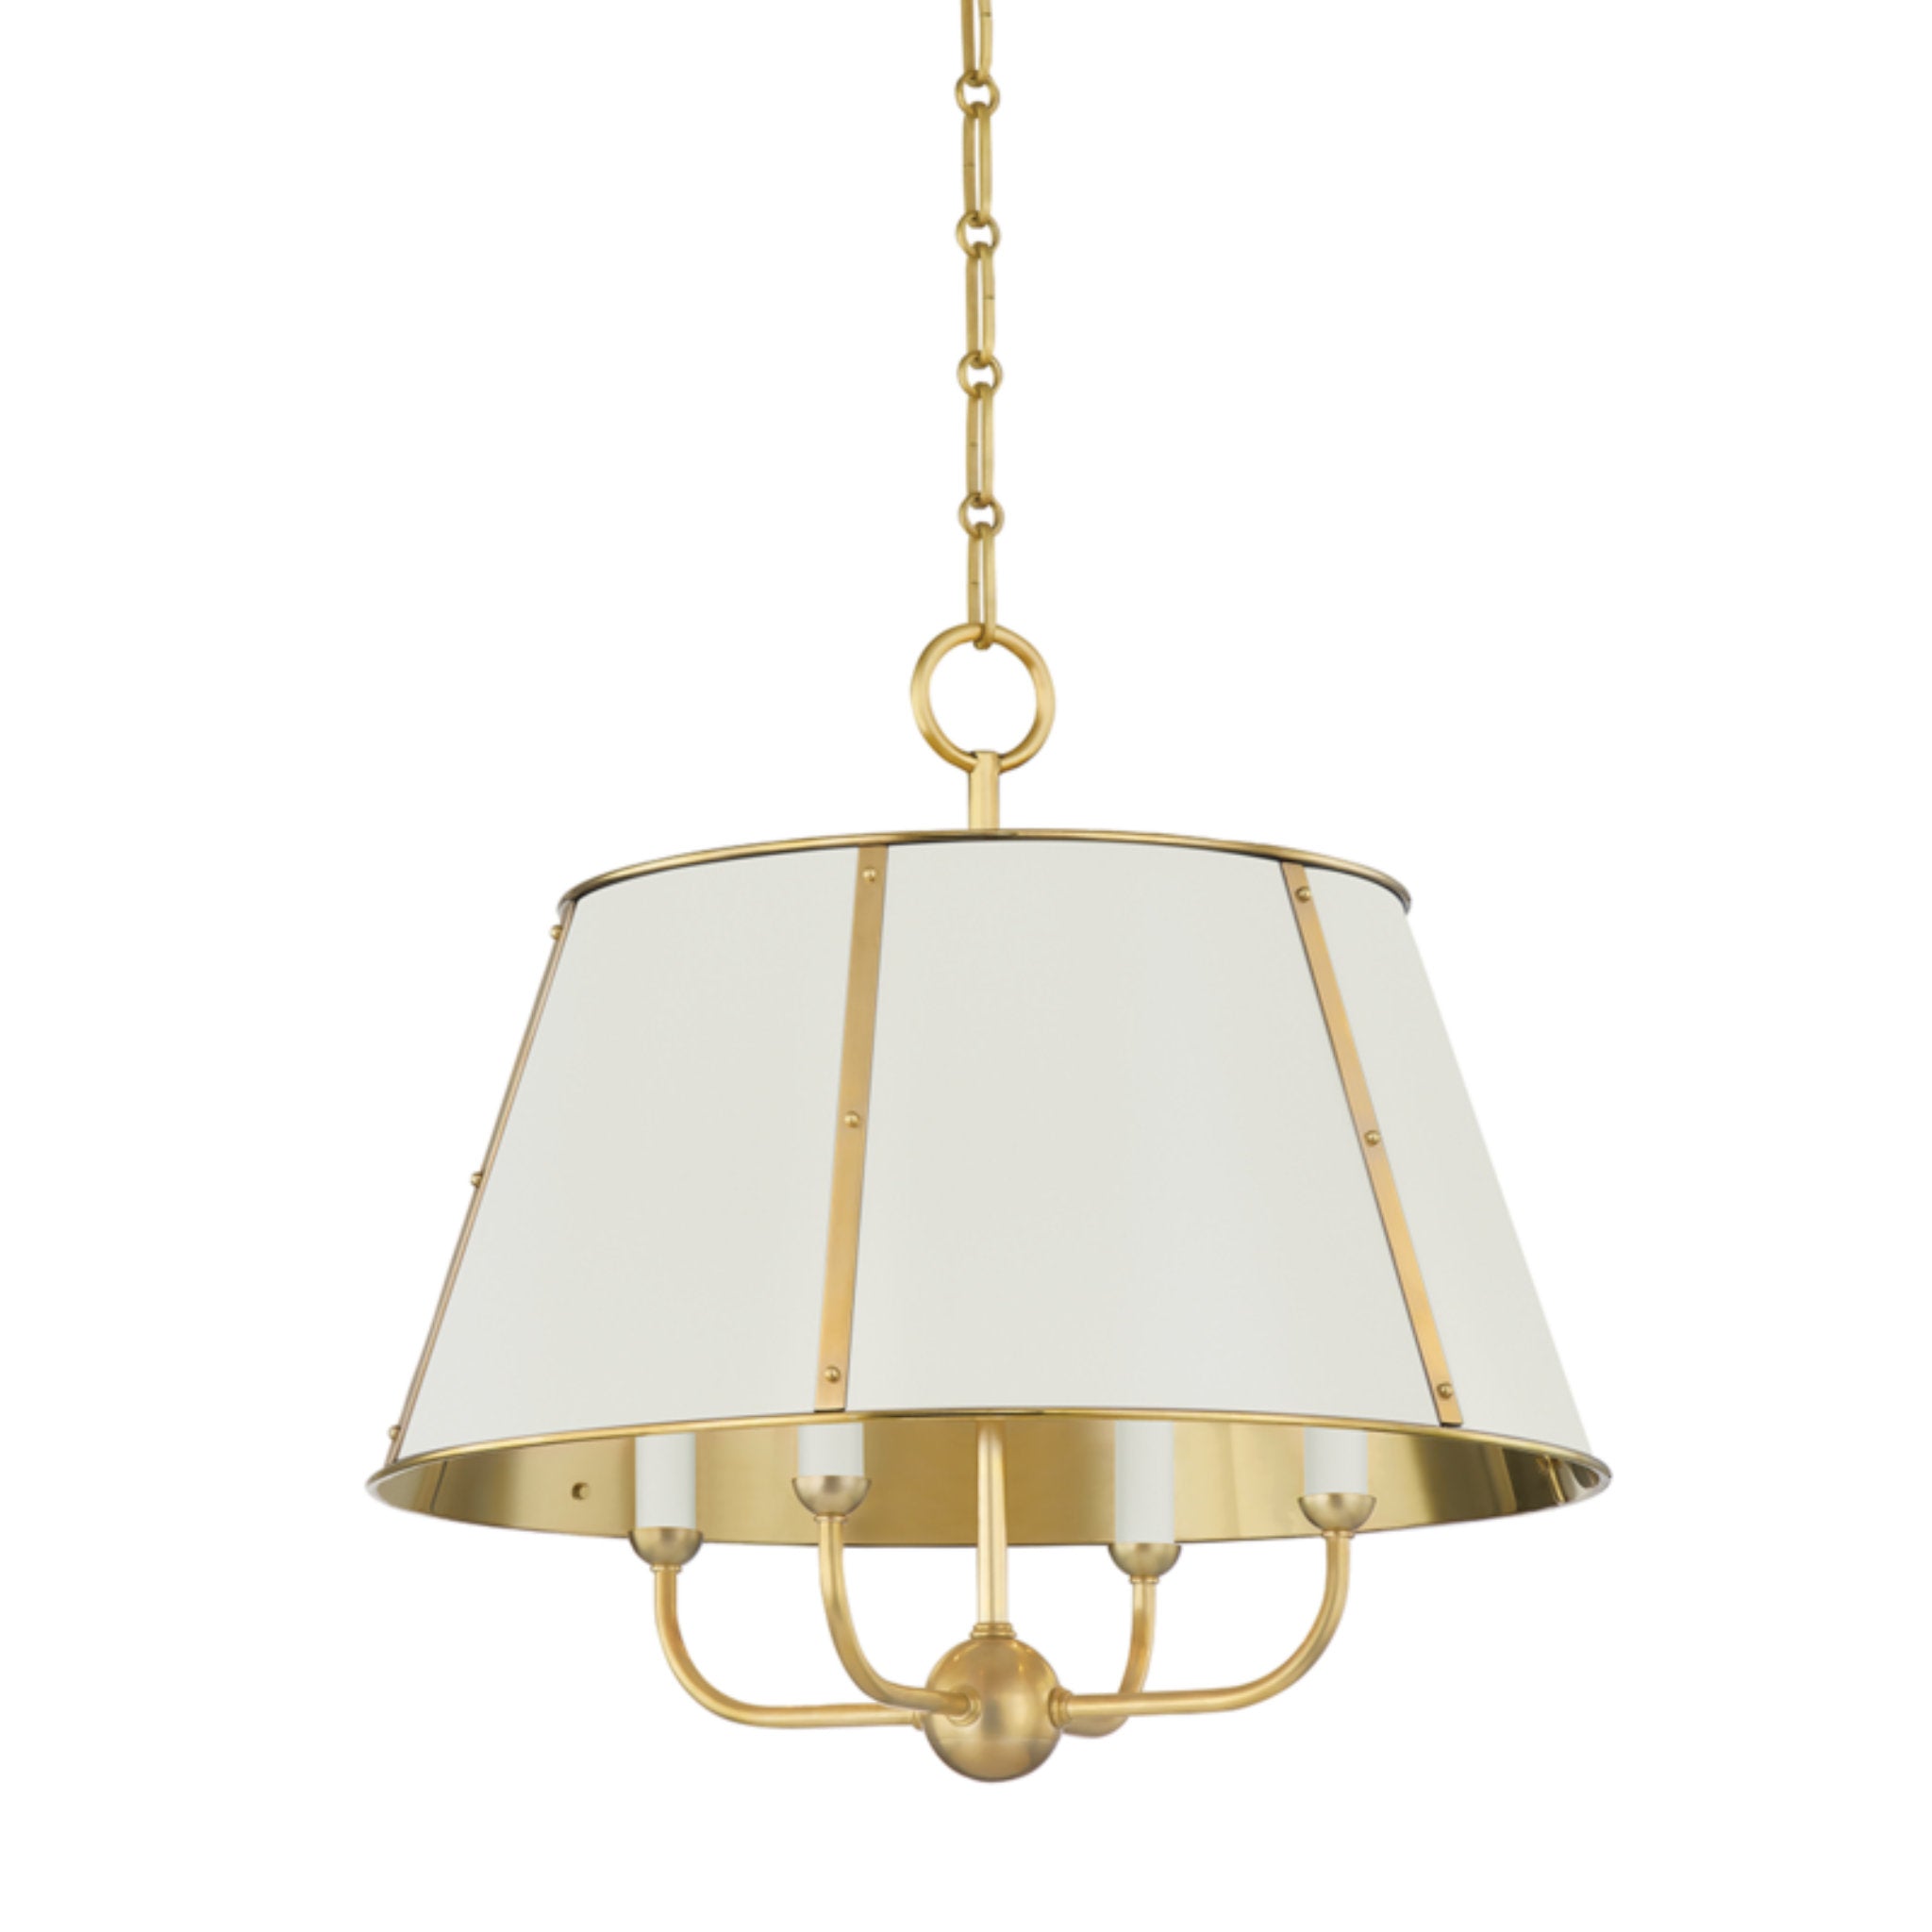 Cambridge 4 Light Chandelier in Aged Brass/off White by Mark D. Sikes